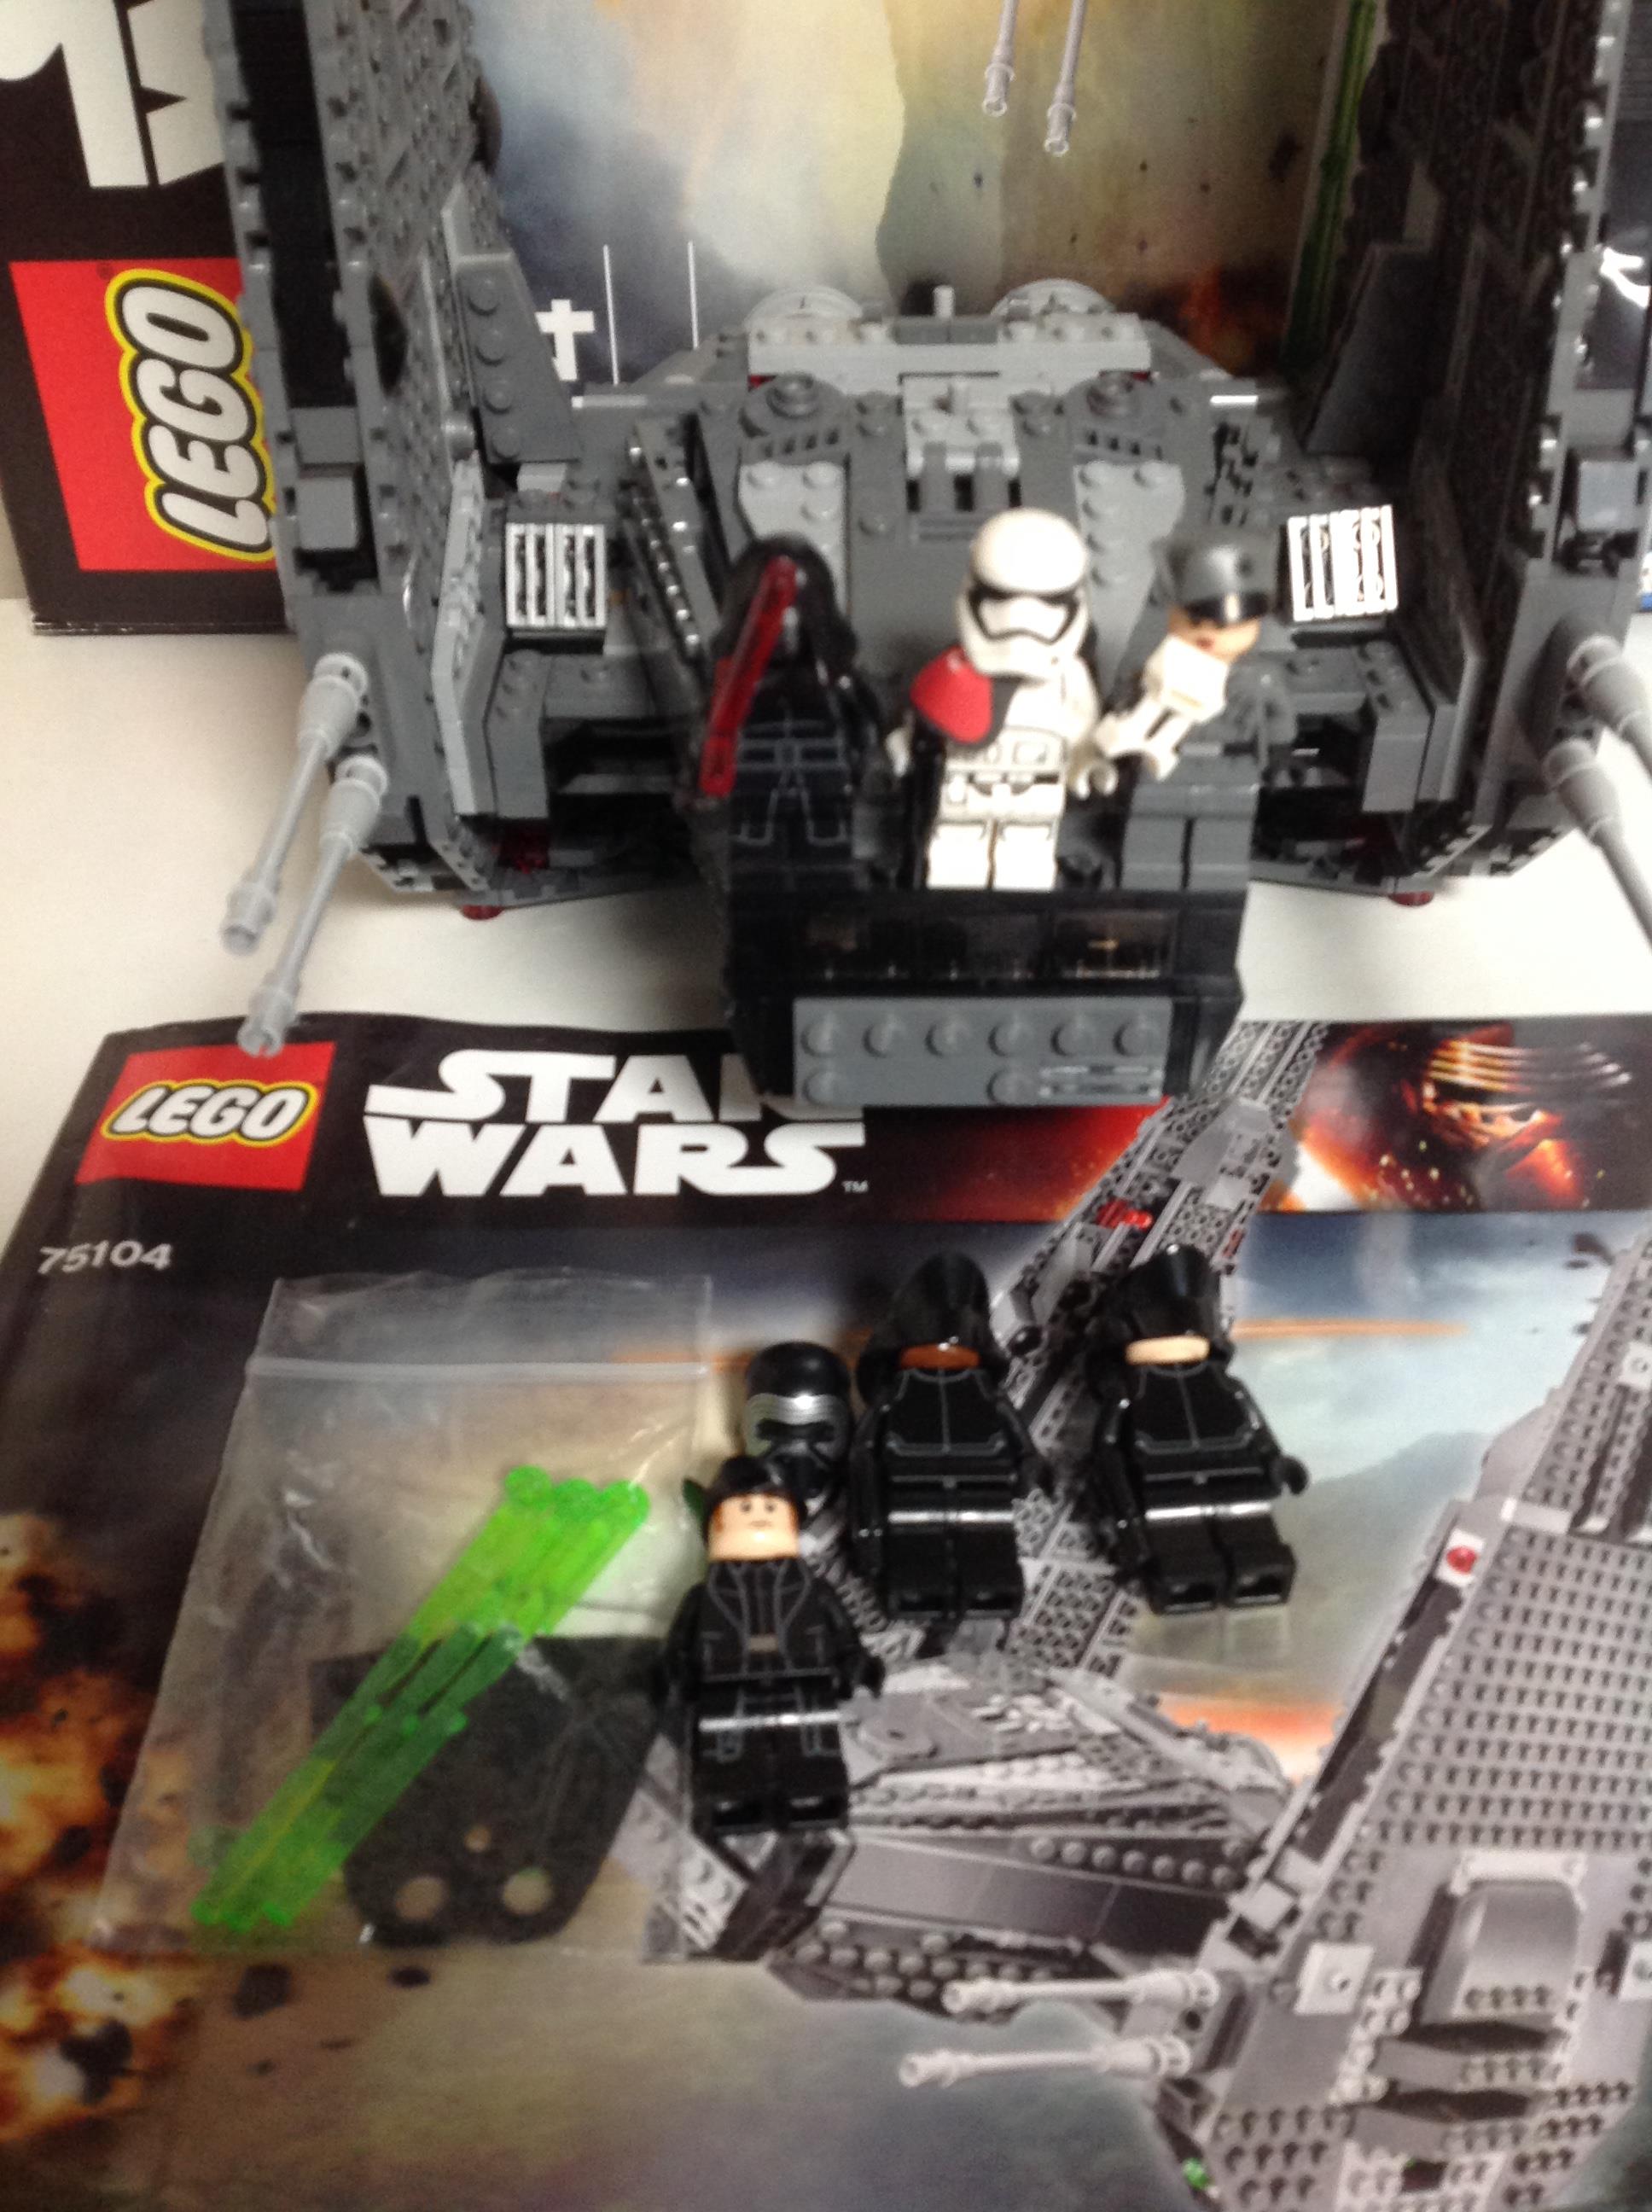 A Lego Star Wars 75104 Kylo Ren's Command Shuttle, with box and instructions. - Image 2 of 2